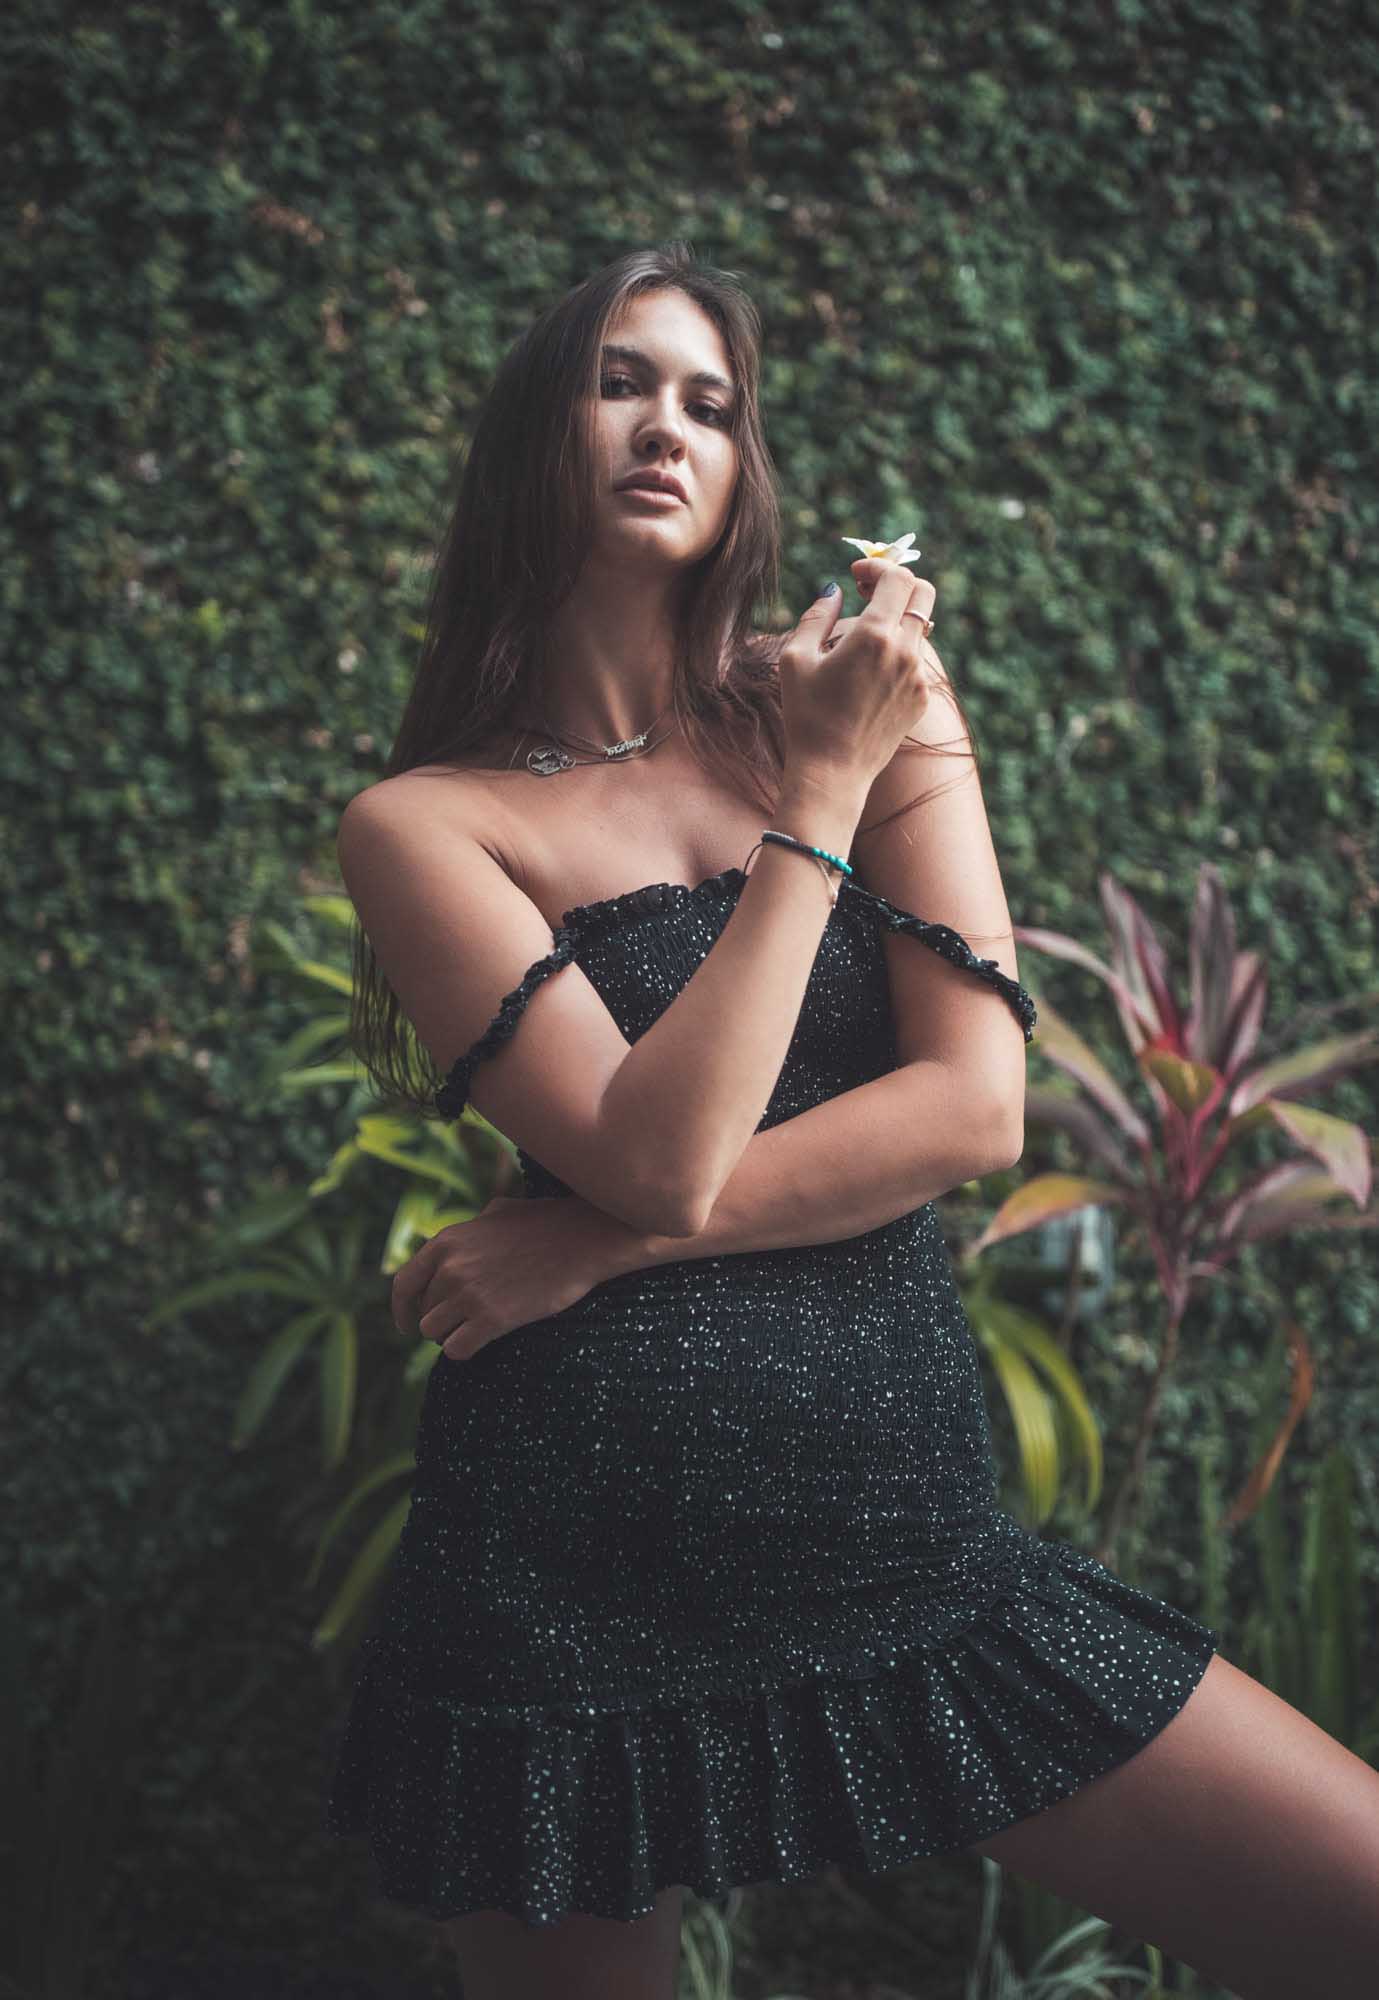 Woman in sexy black dress poses with a flower | Fashion Photography | Portrait | Lifestyle Photography | Canggu ,Bali, Indonesia | Sexy | Hot | Denver Photographer